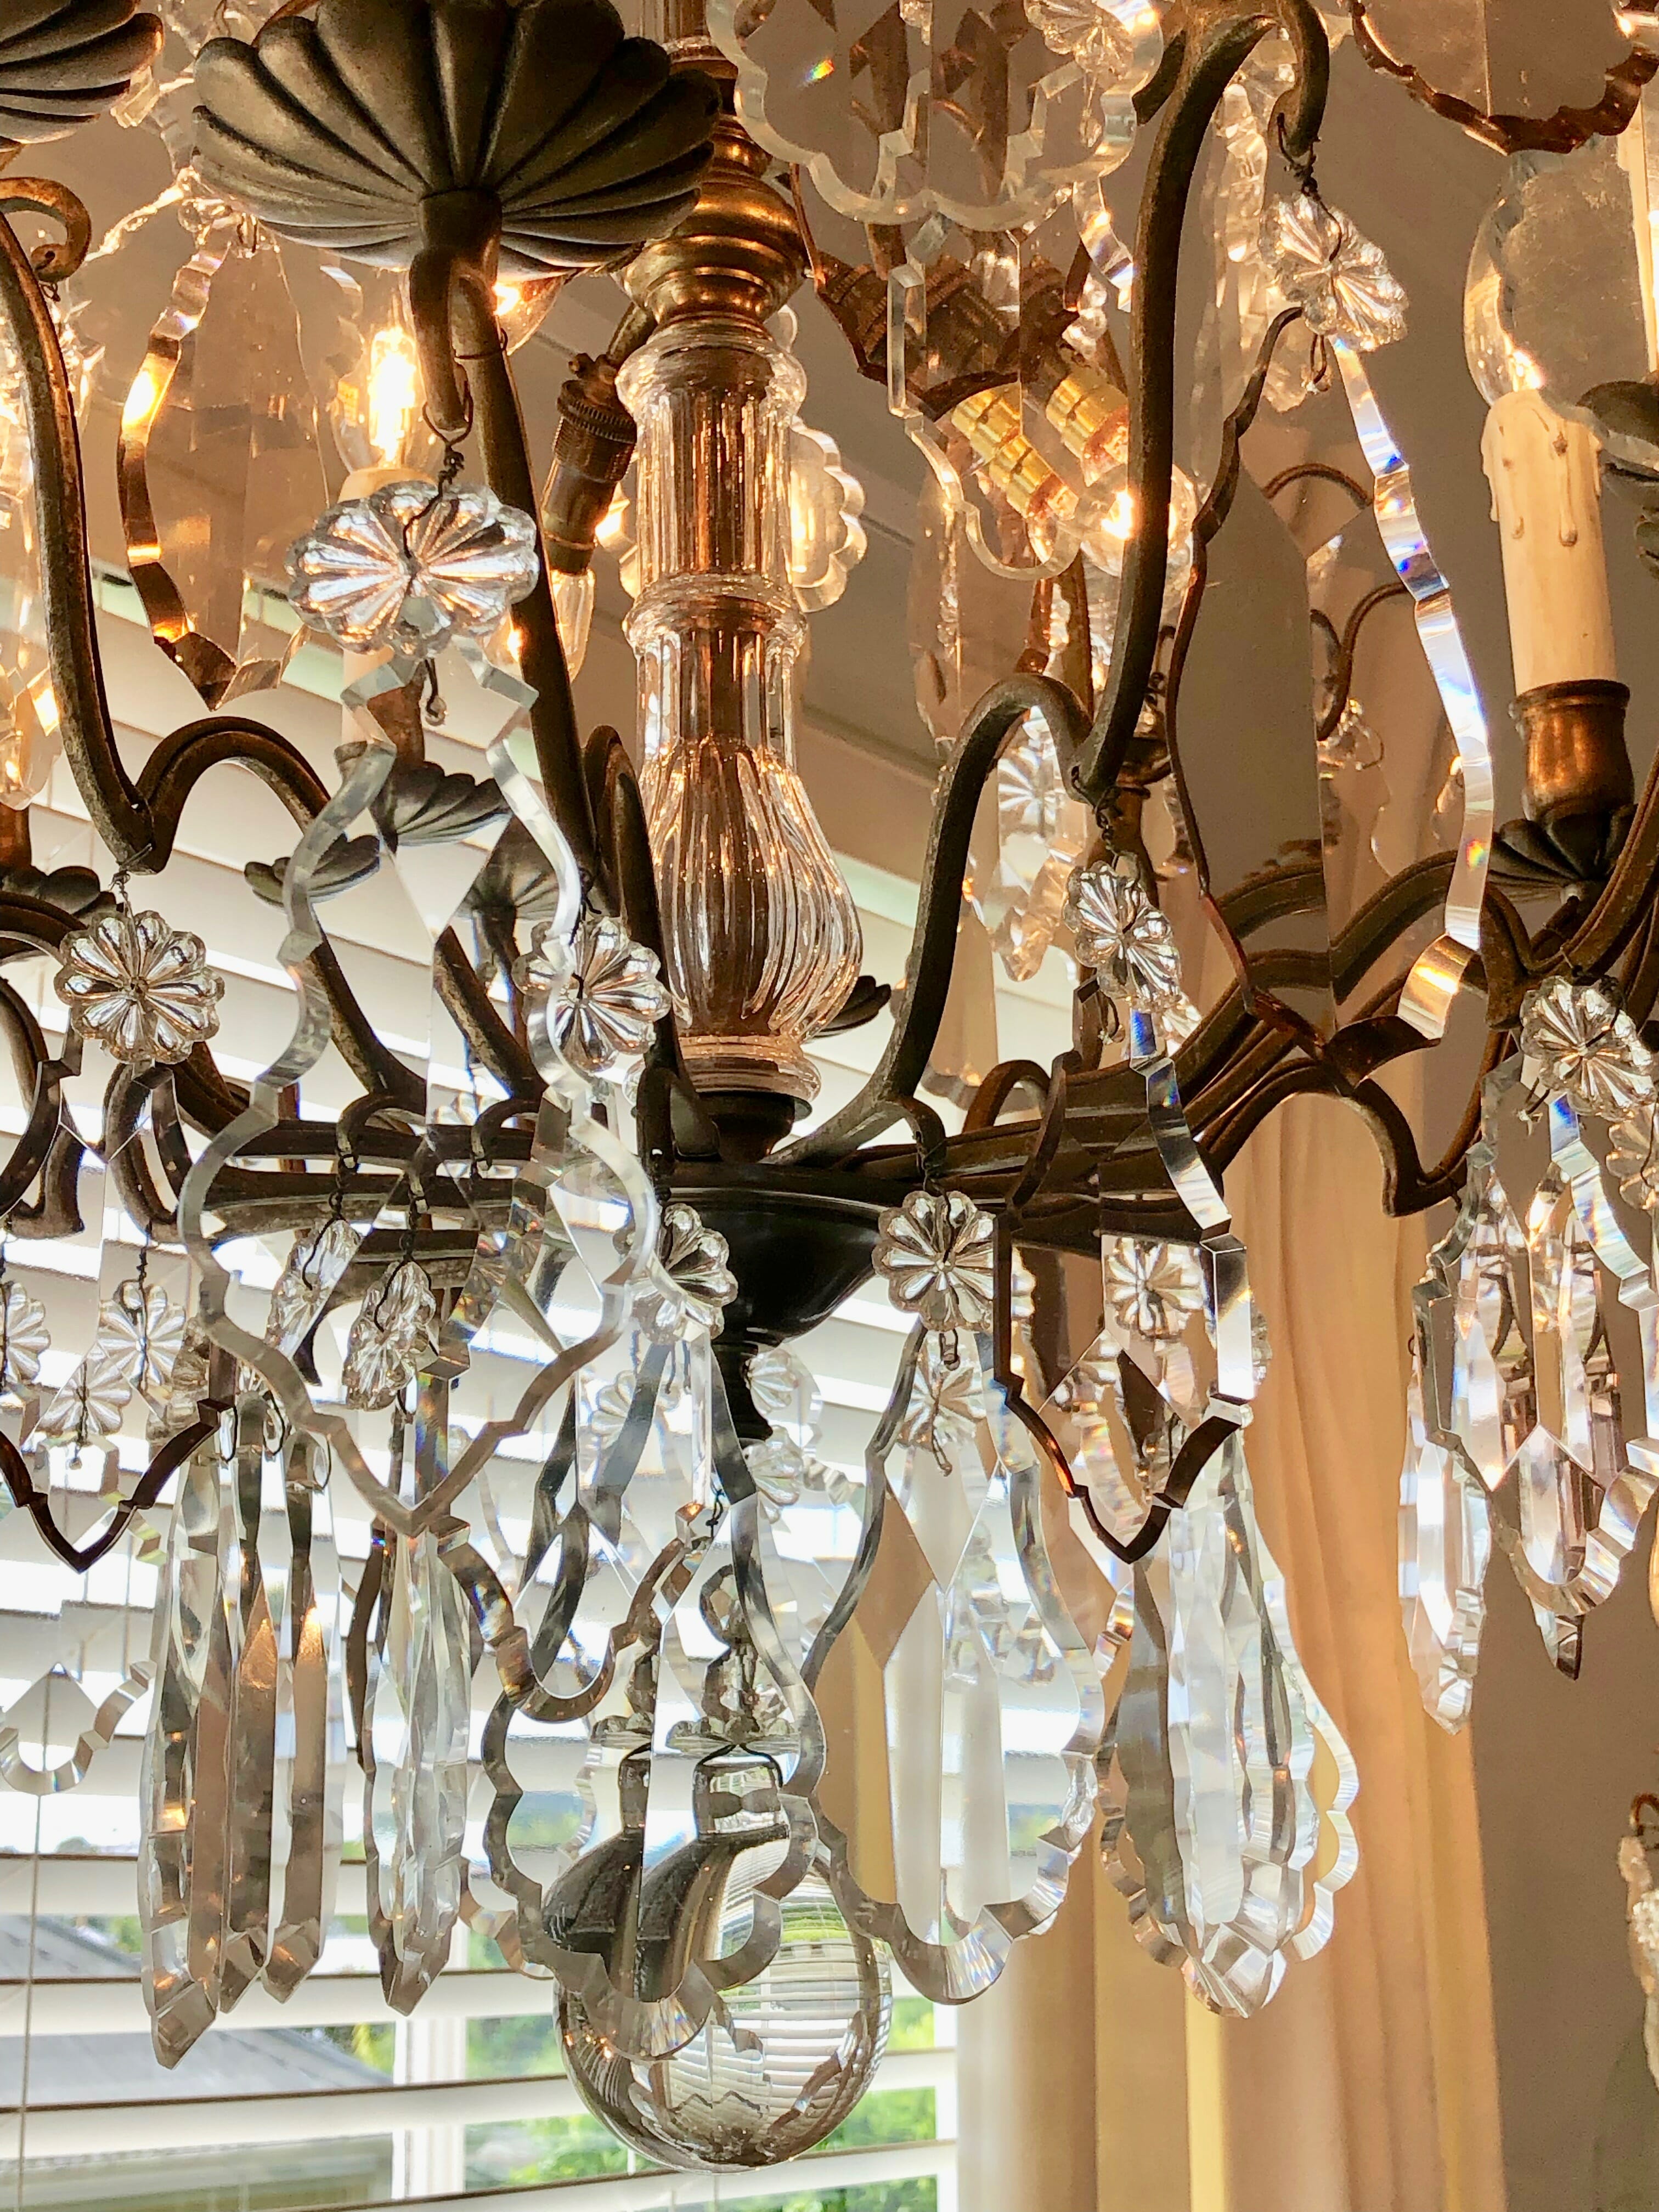 19th century French crystal and bronze chandelier - European Antiques